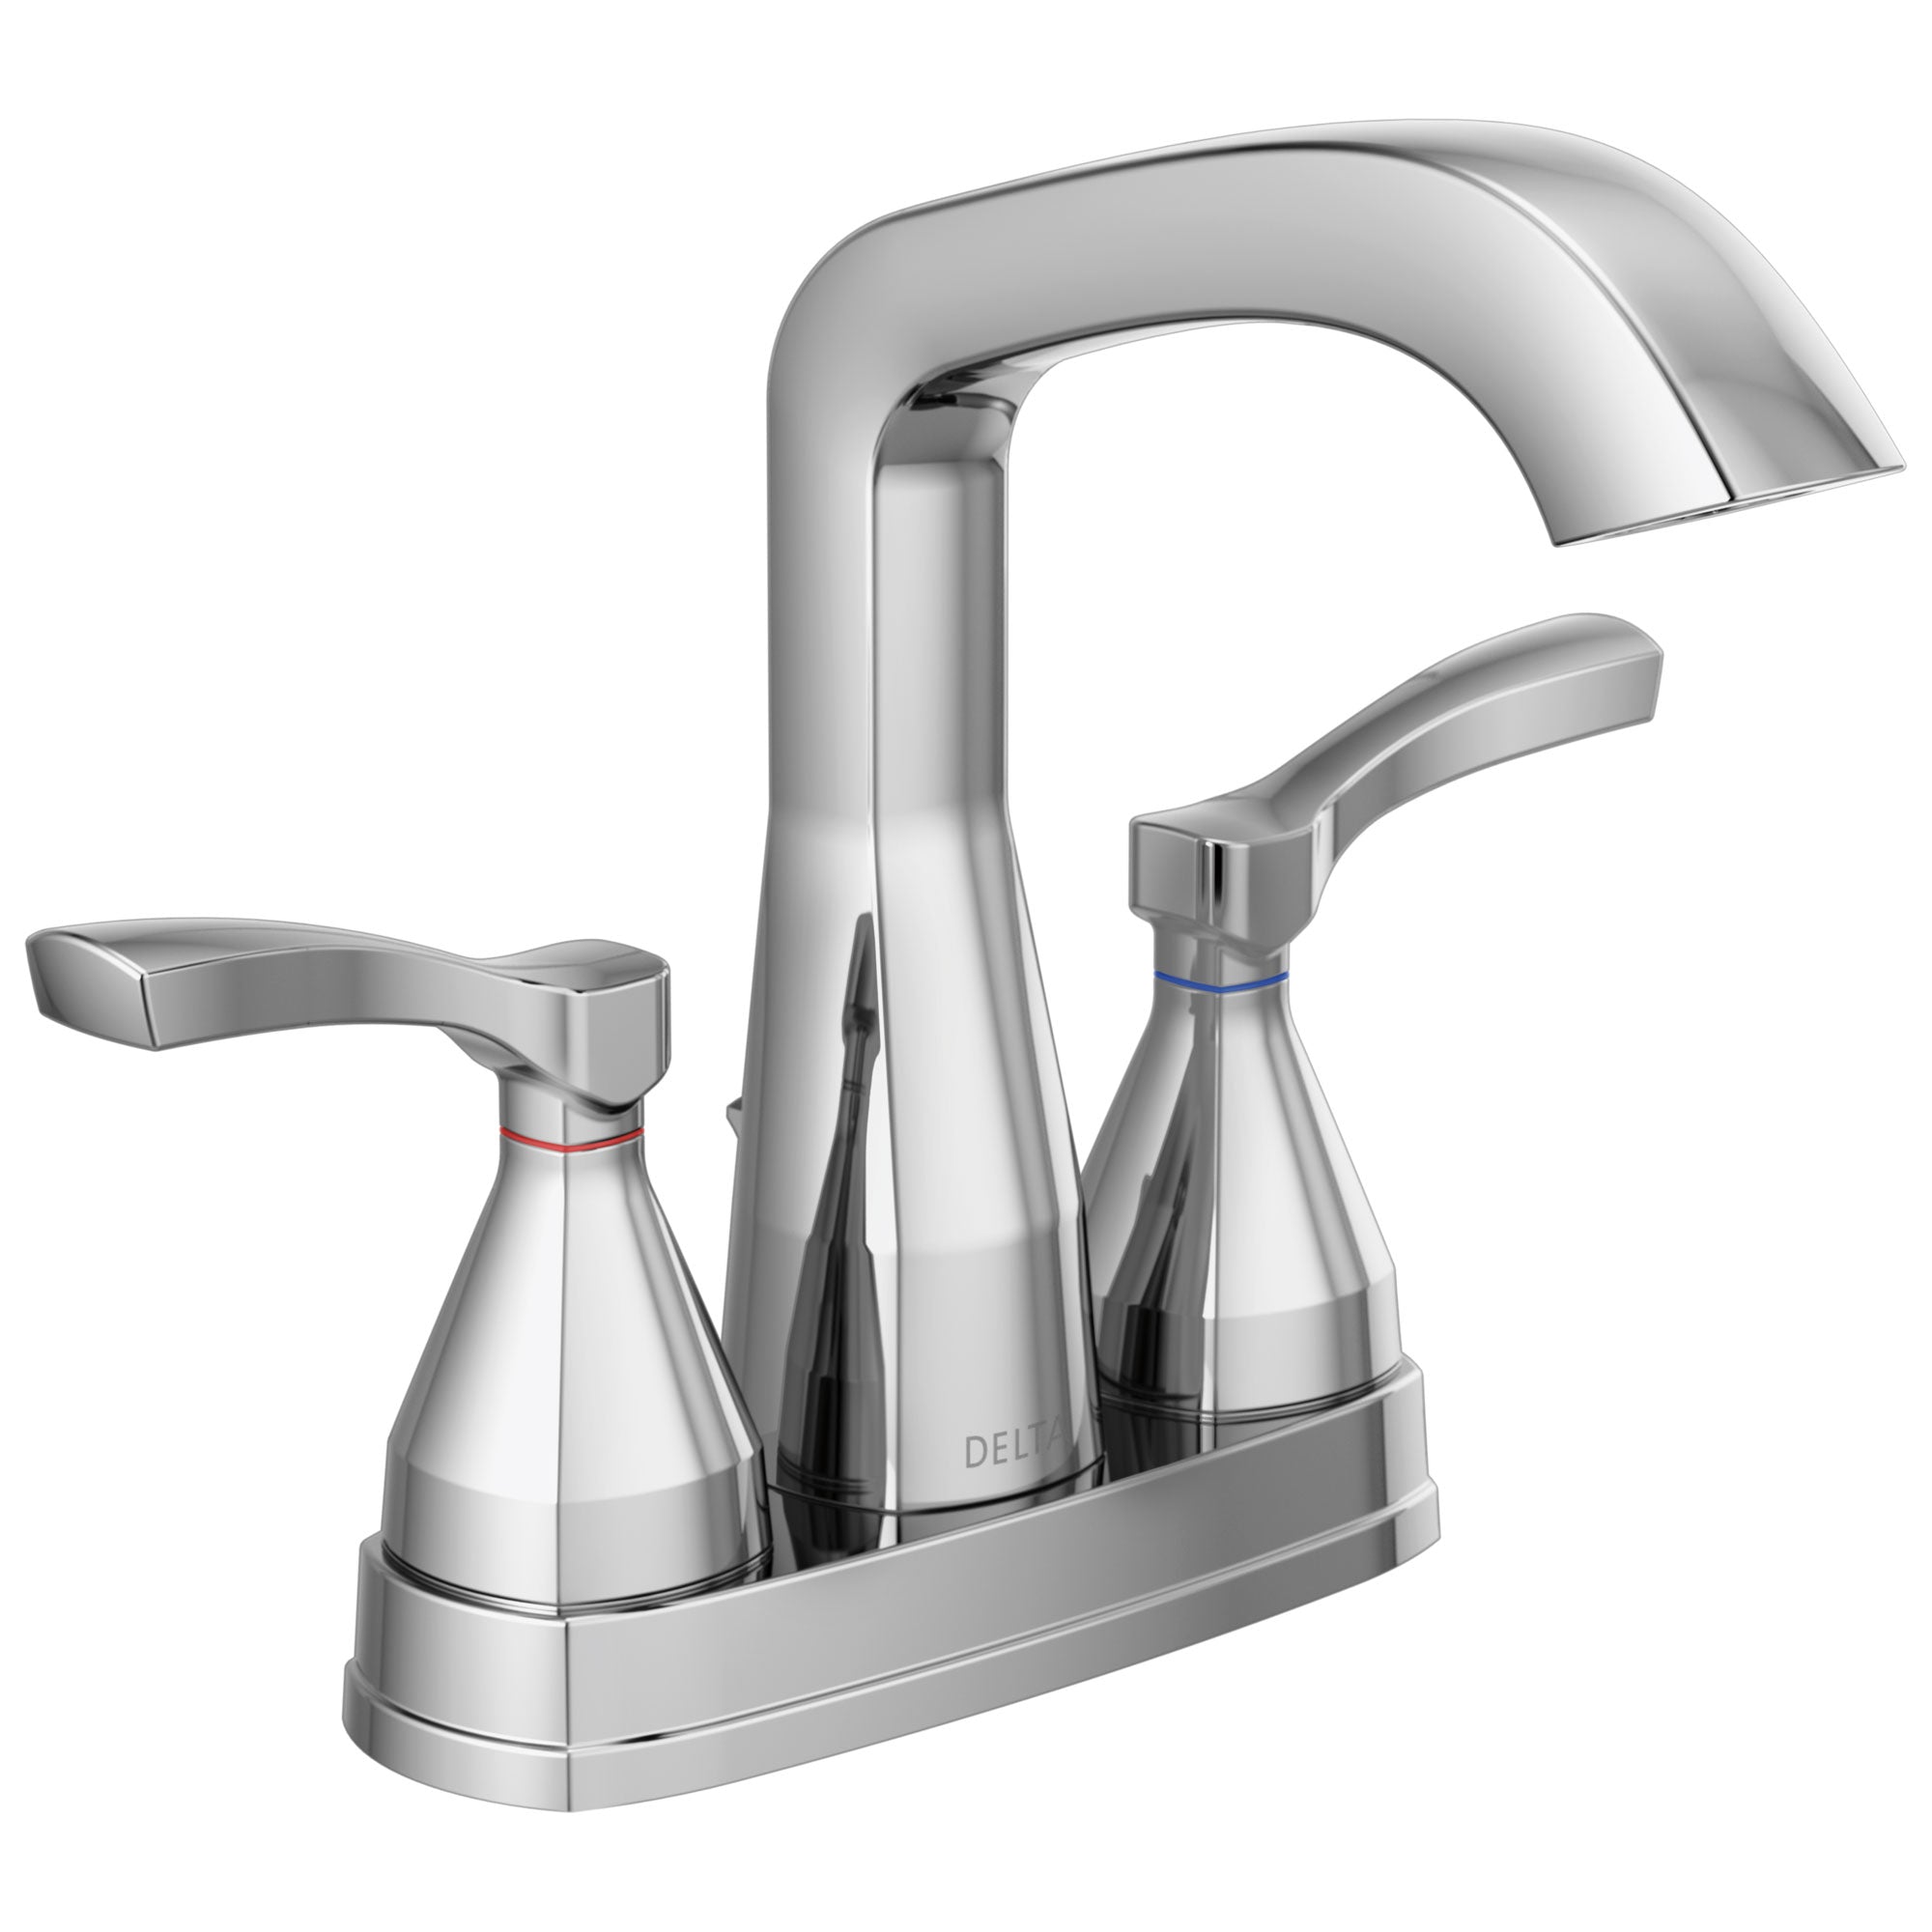 Delta Stryke Chrome Finish Centerset Bathroom Sink Faucet with Matching Drain and Lever Handles D25776MPUDST